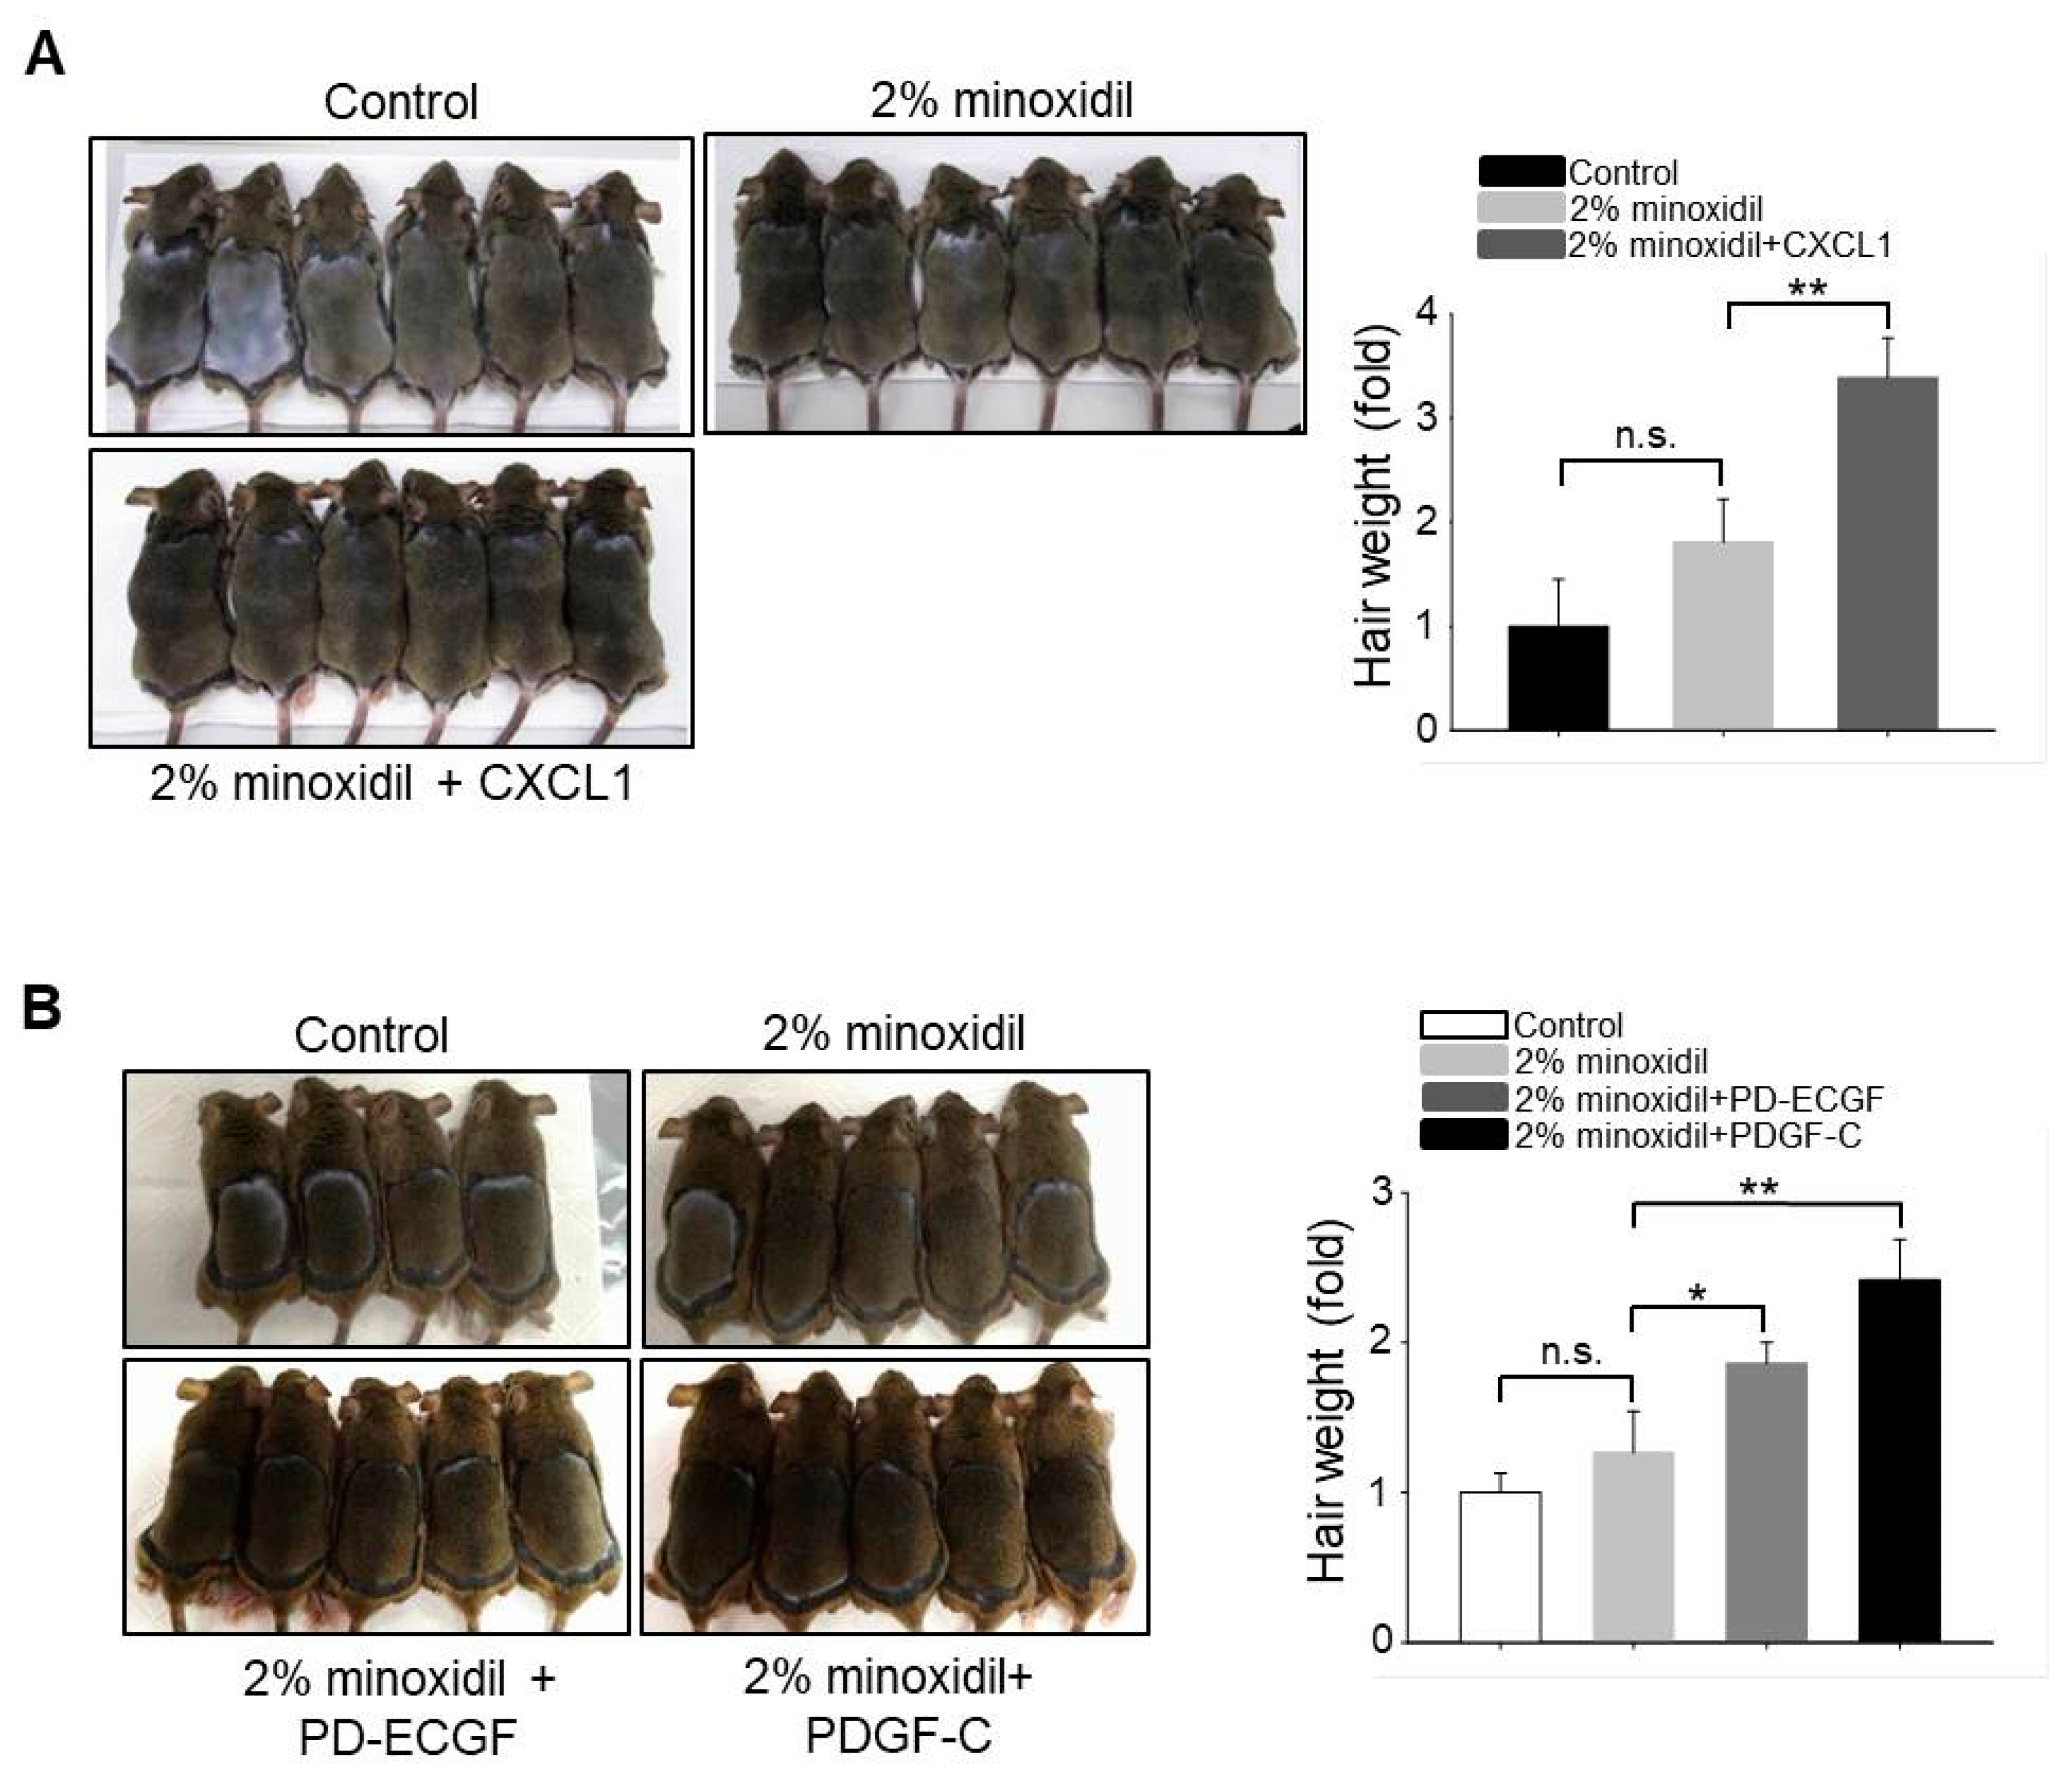 IJMS | Full-Text | Minoxidil Promotes Hair Growth through Stimulation Growth Factor Release from Adipose-Derived Stem Cells